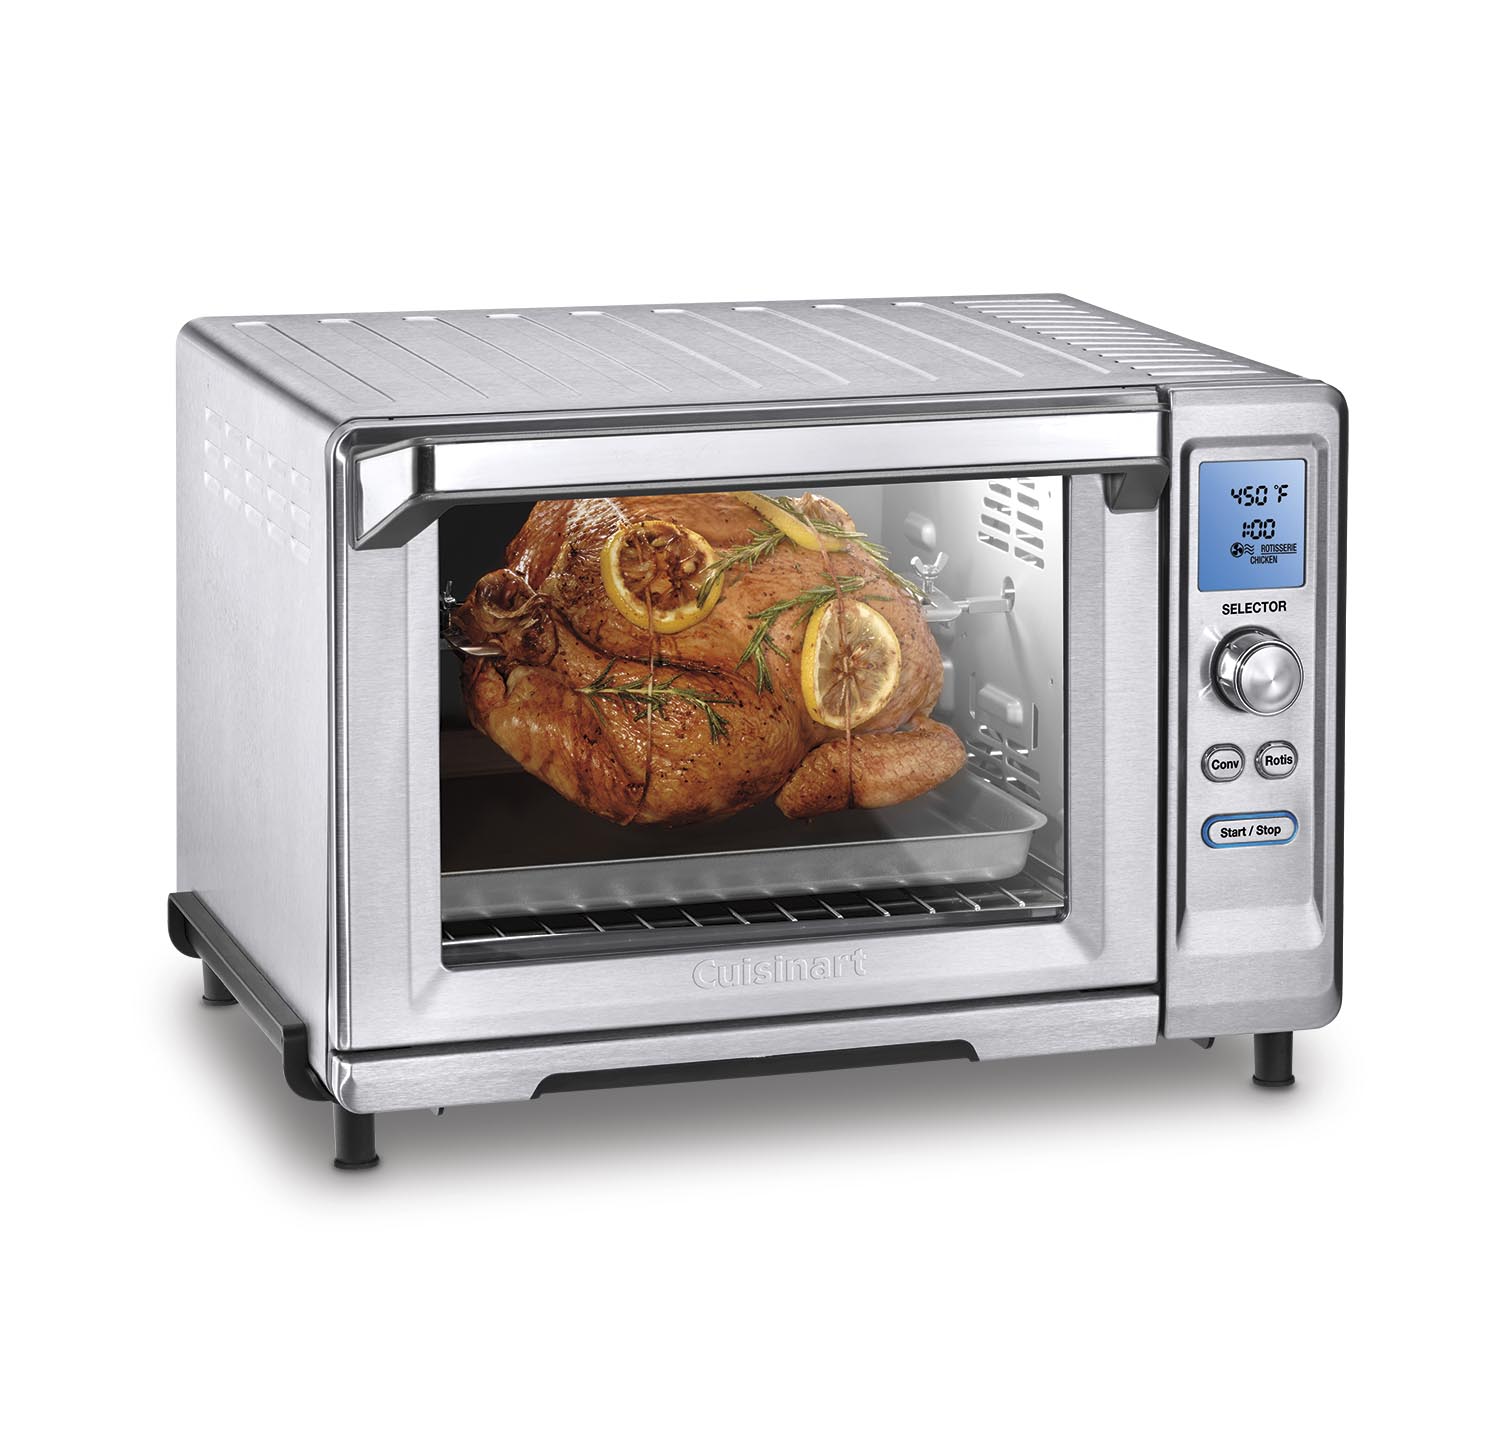 Cuisinart TOB-200 - Electric oven - 24 qt - 1.9 kW - brushed stainless steel - image 3 of 4